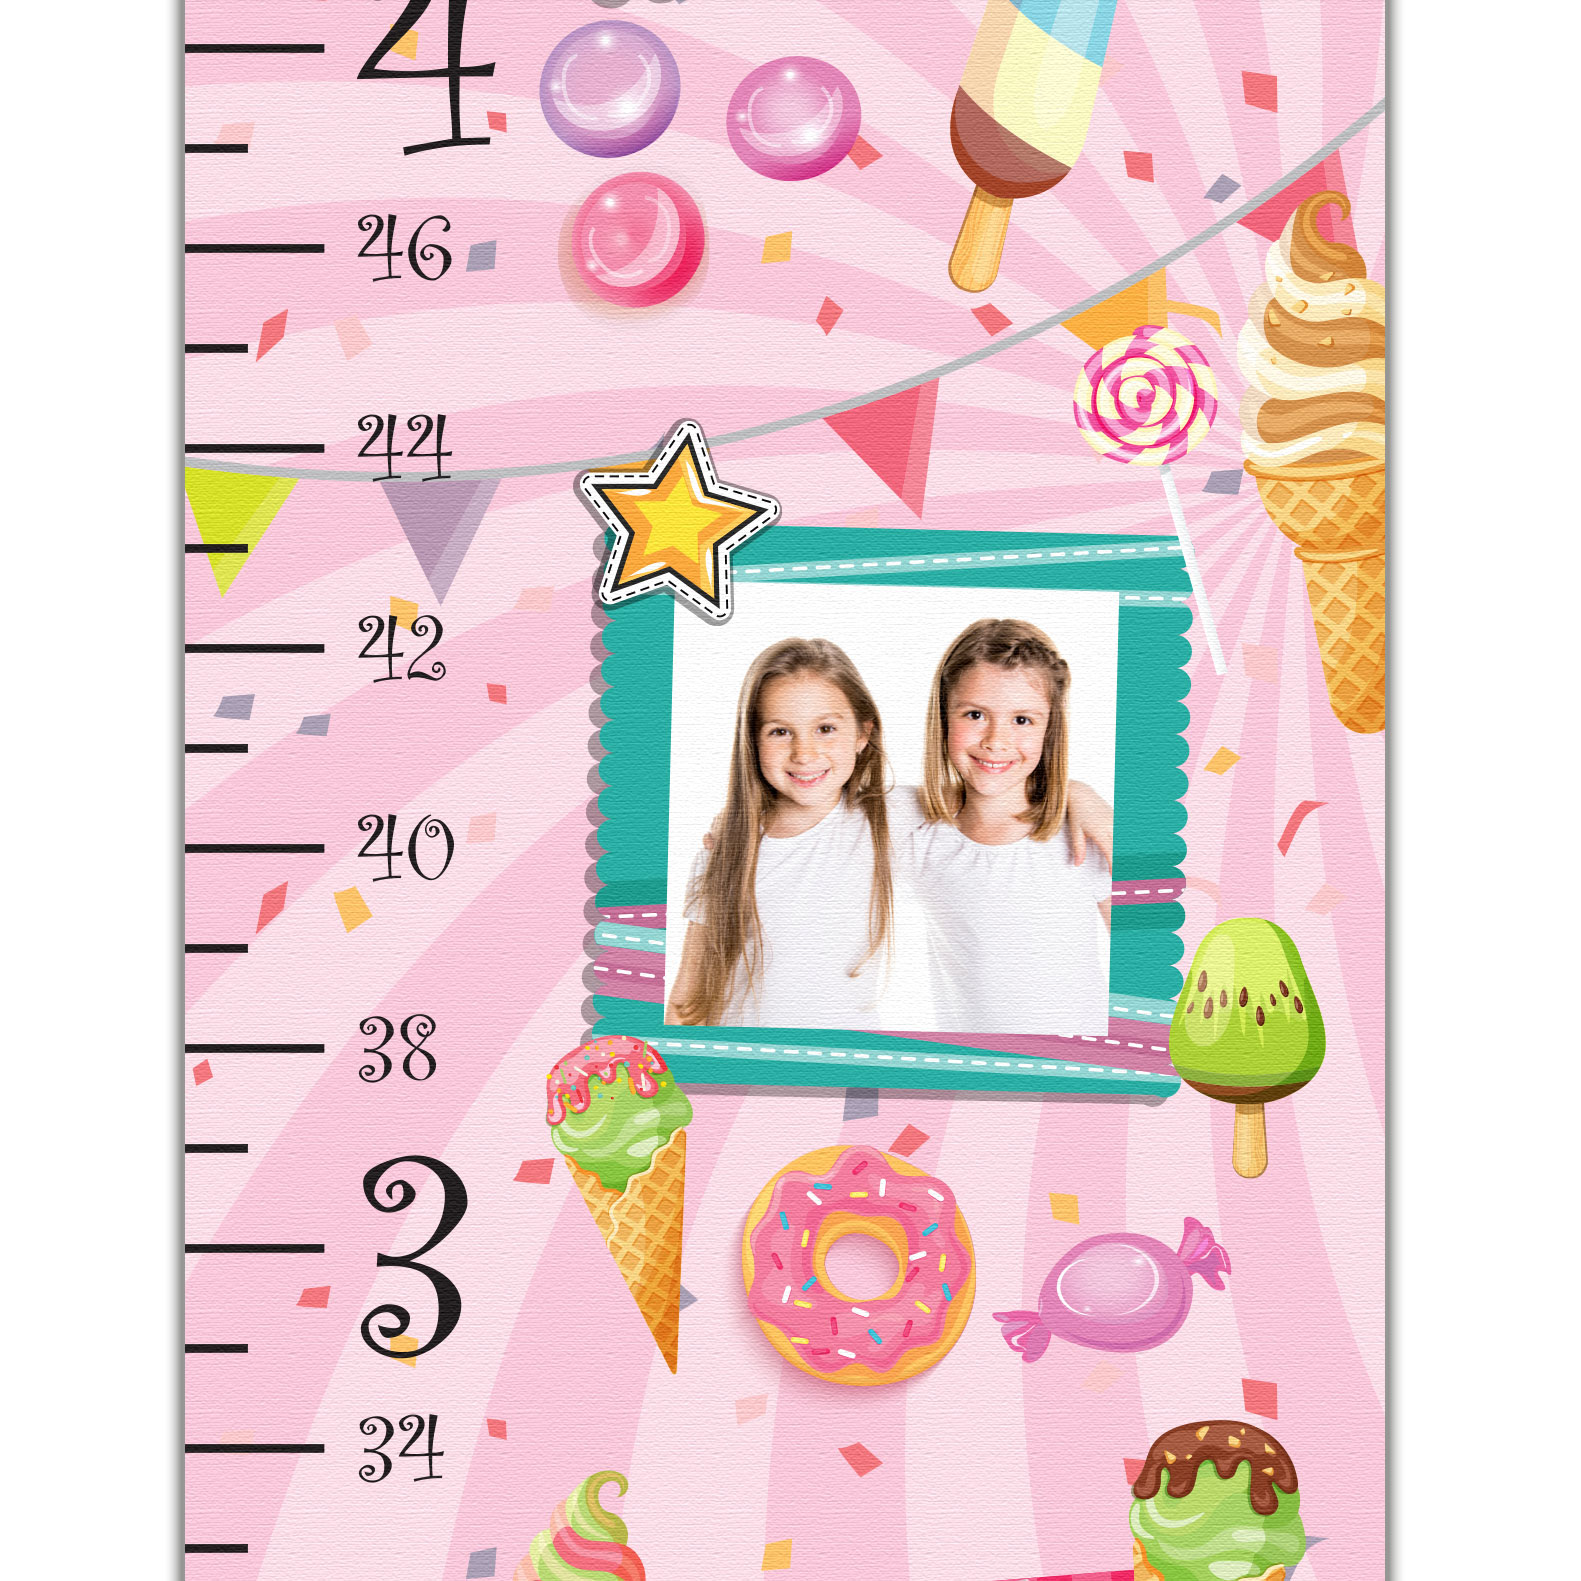 Sweets Growth Chart with Personalized Photos